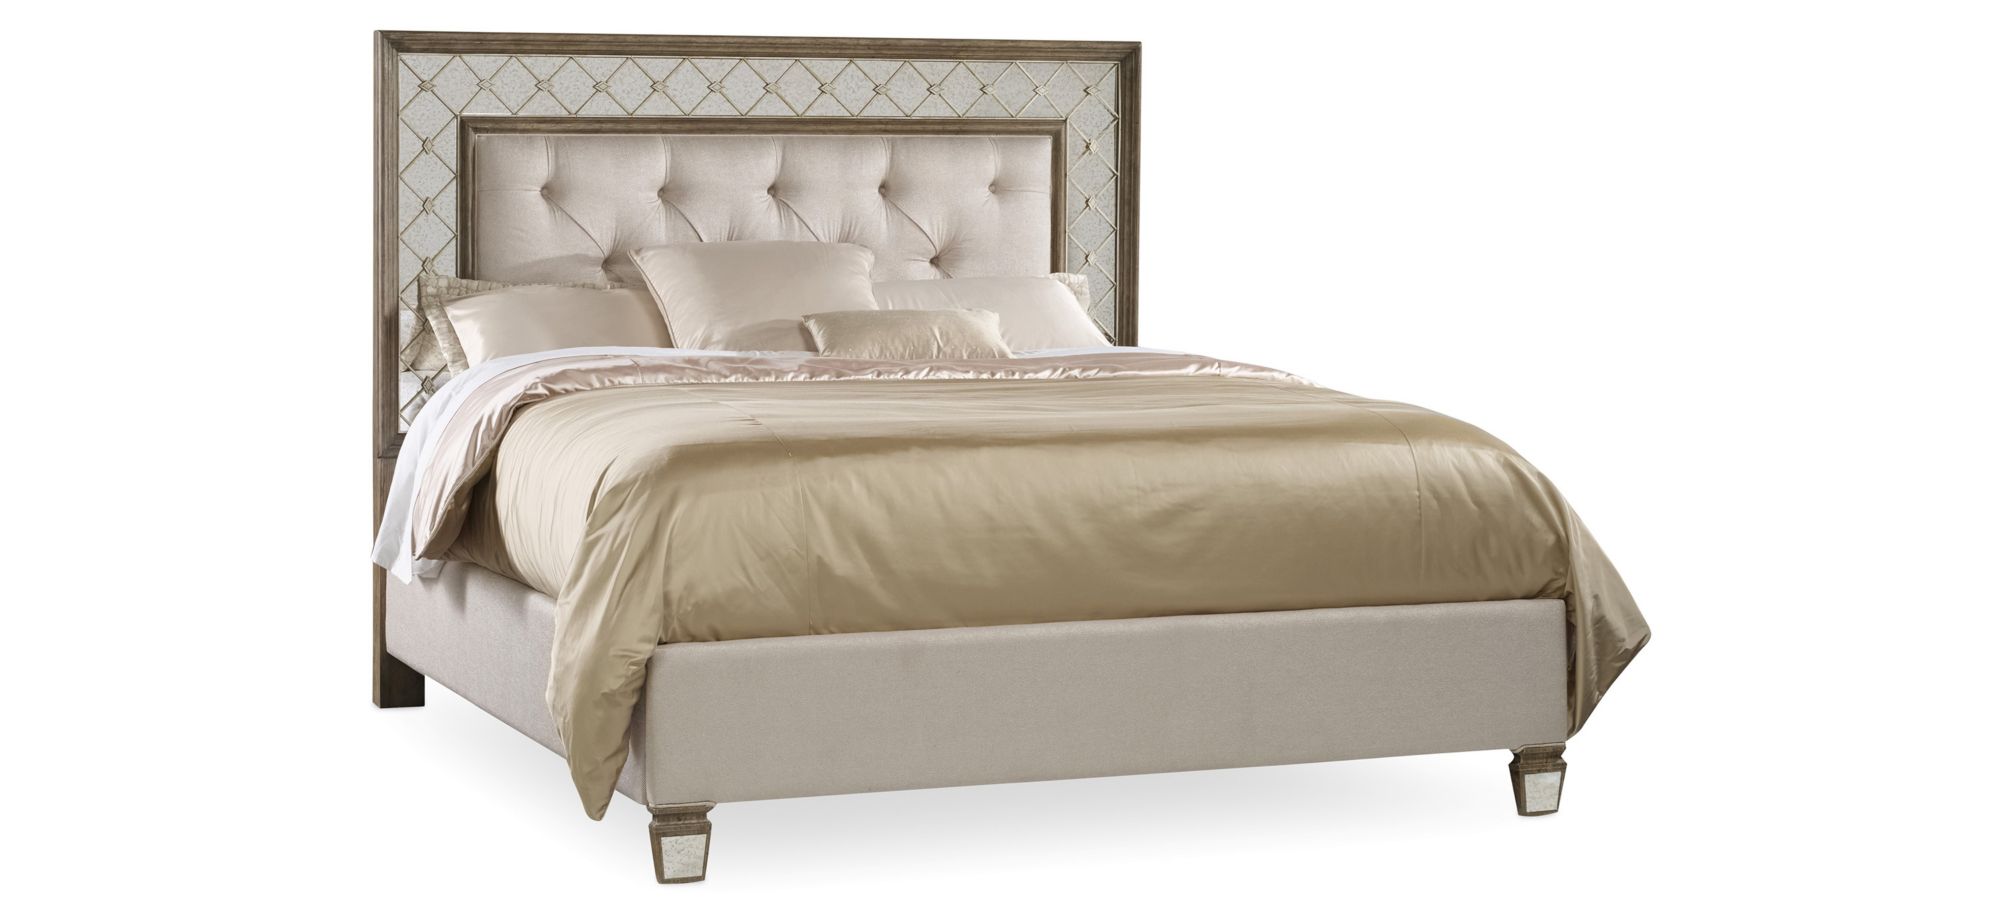 Sanctuary Mirrored Upholstered Bed in Avalon: Antique mirror frame with wood finished trim by Hooker Furniture